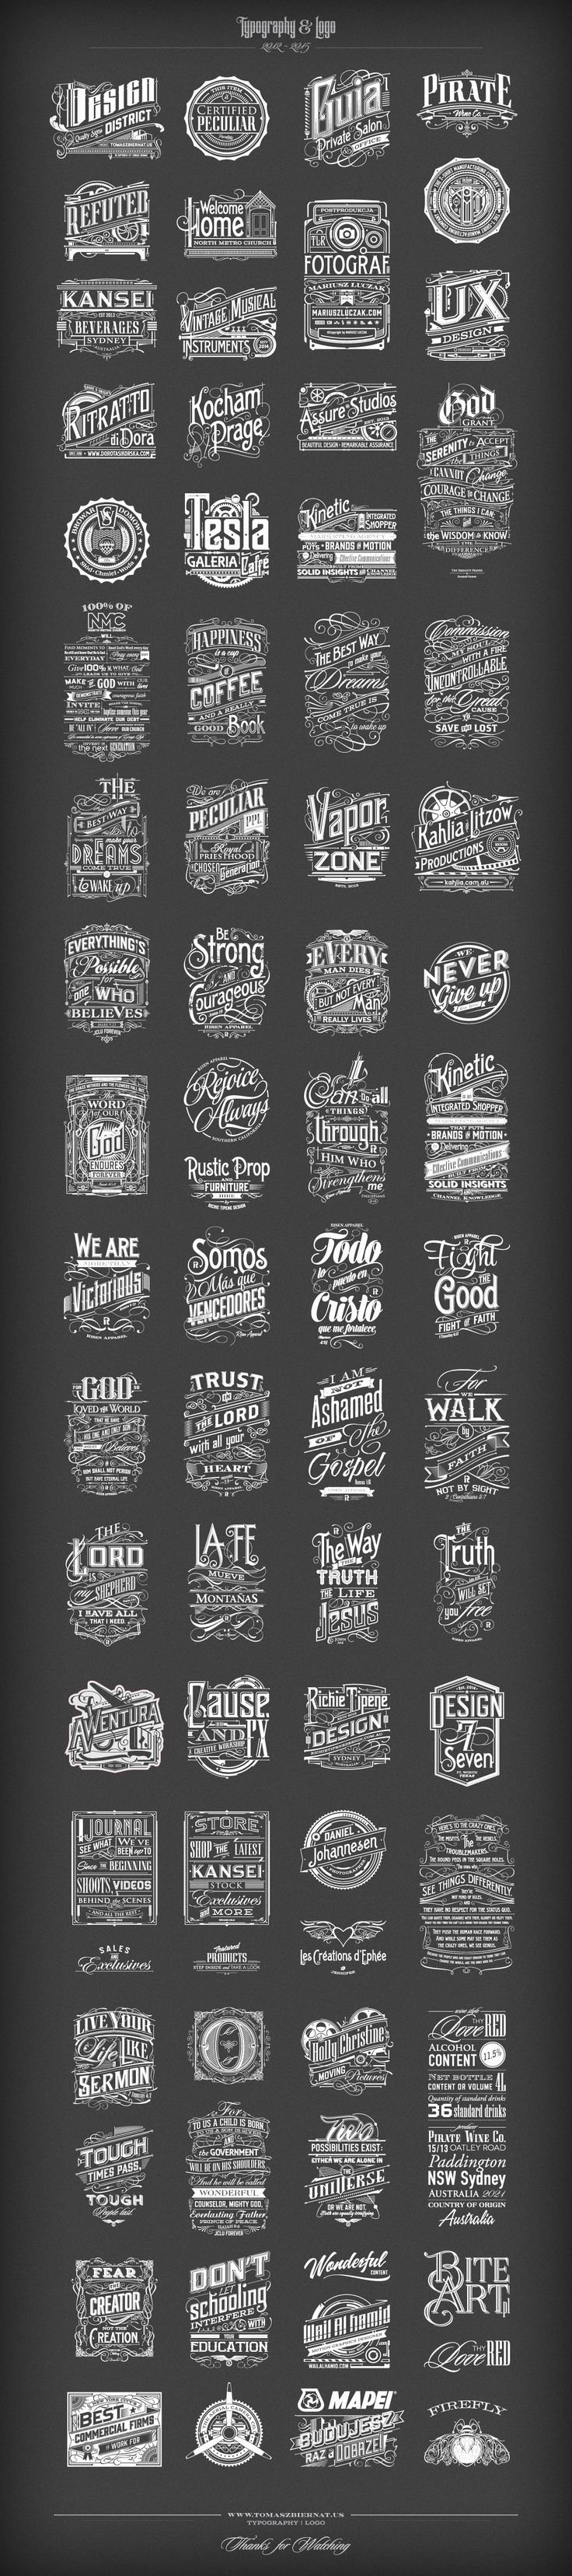 typography and logos - type inspiration